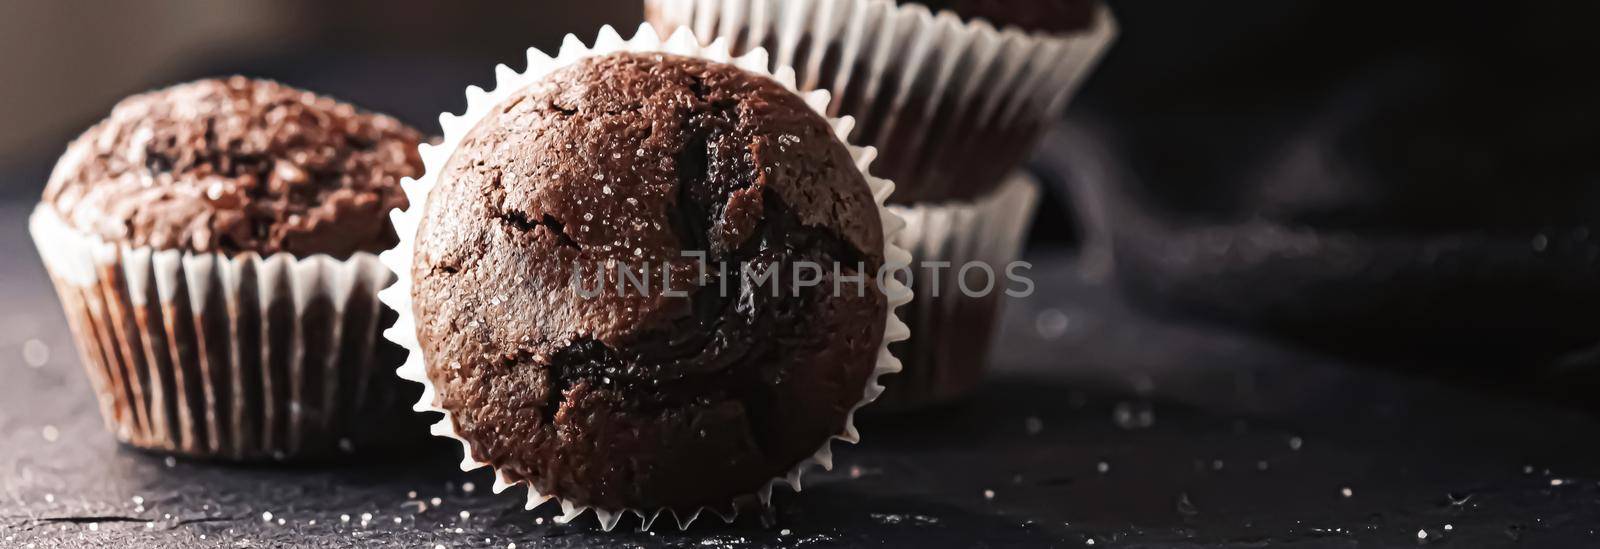 Homemade chocolate muffins, baked comfort food recipe by Anneleven